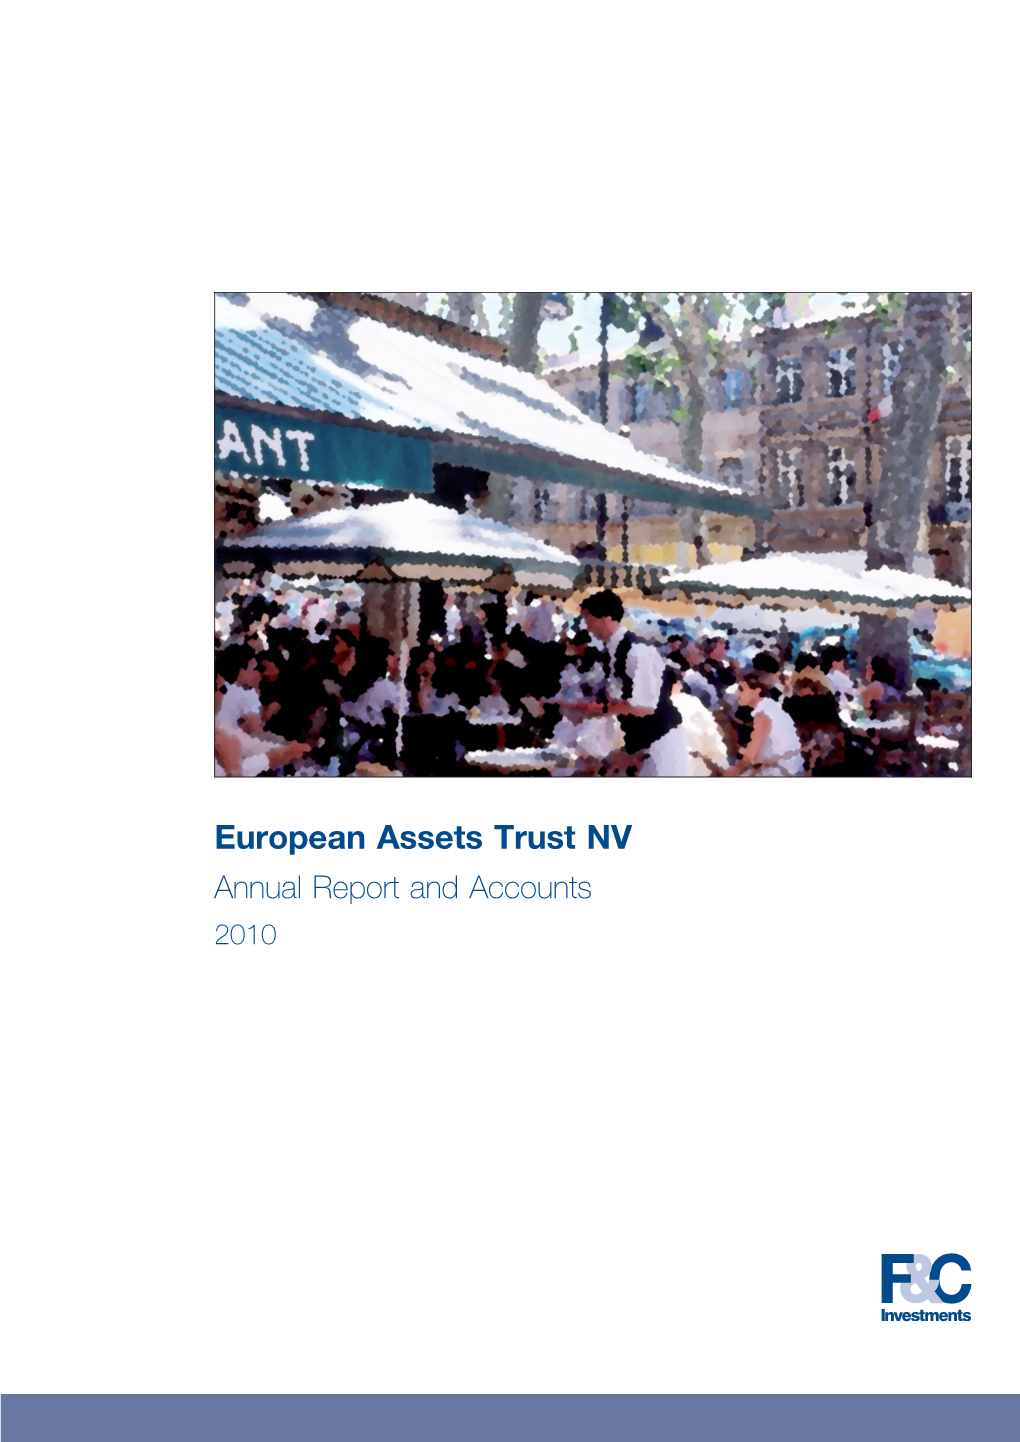 European Assets Trust NV Annual Report and Accounts 2010 Contents